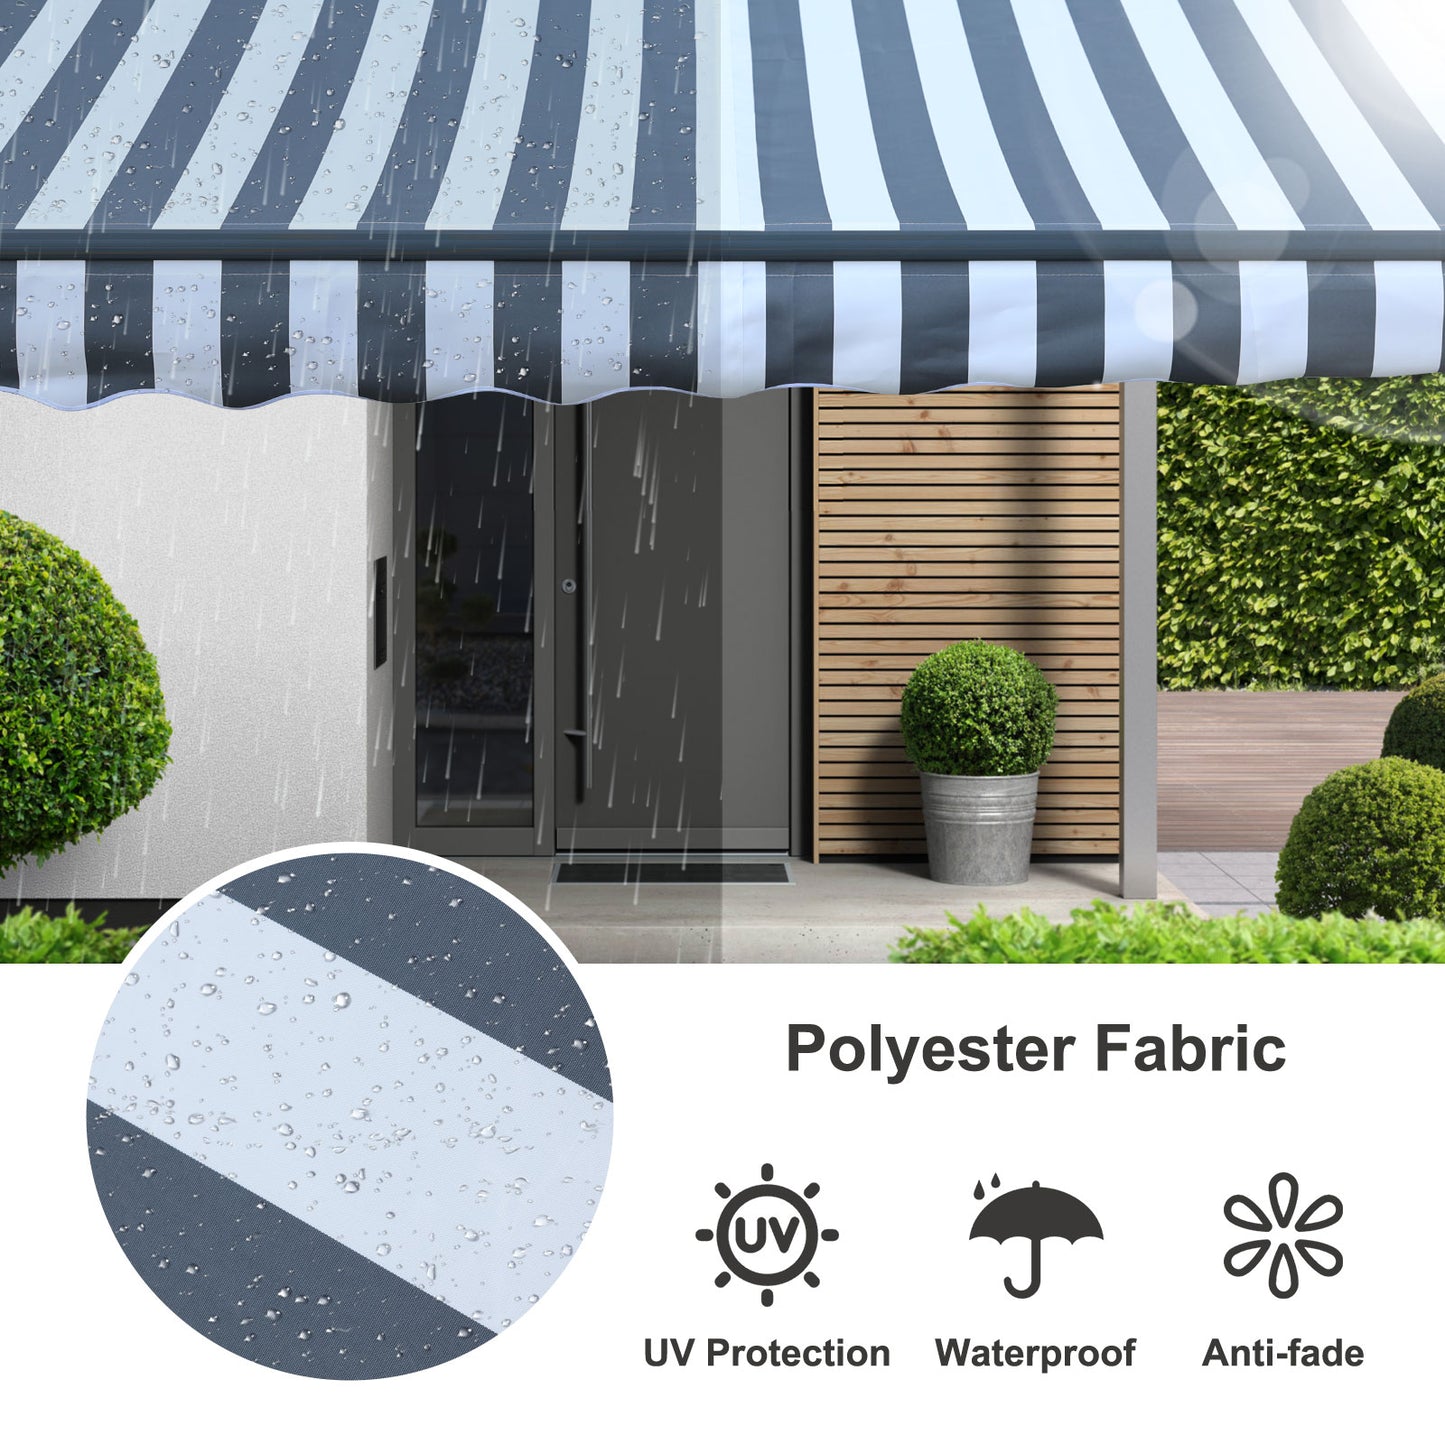 10' x 8' x 5' Retractable Window Awning Sunshade Shelter,Polyester Fabric,with Brackets and Two Wall Bases